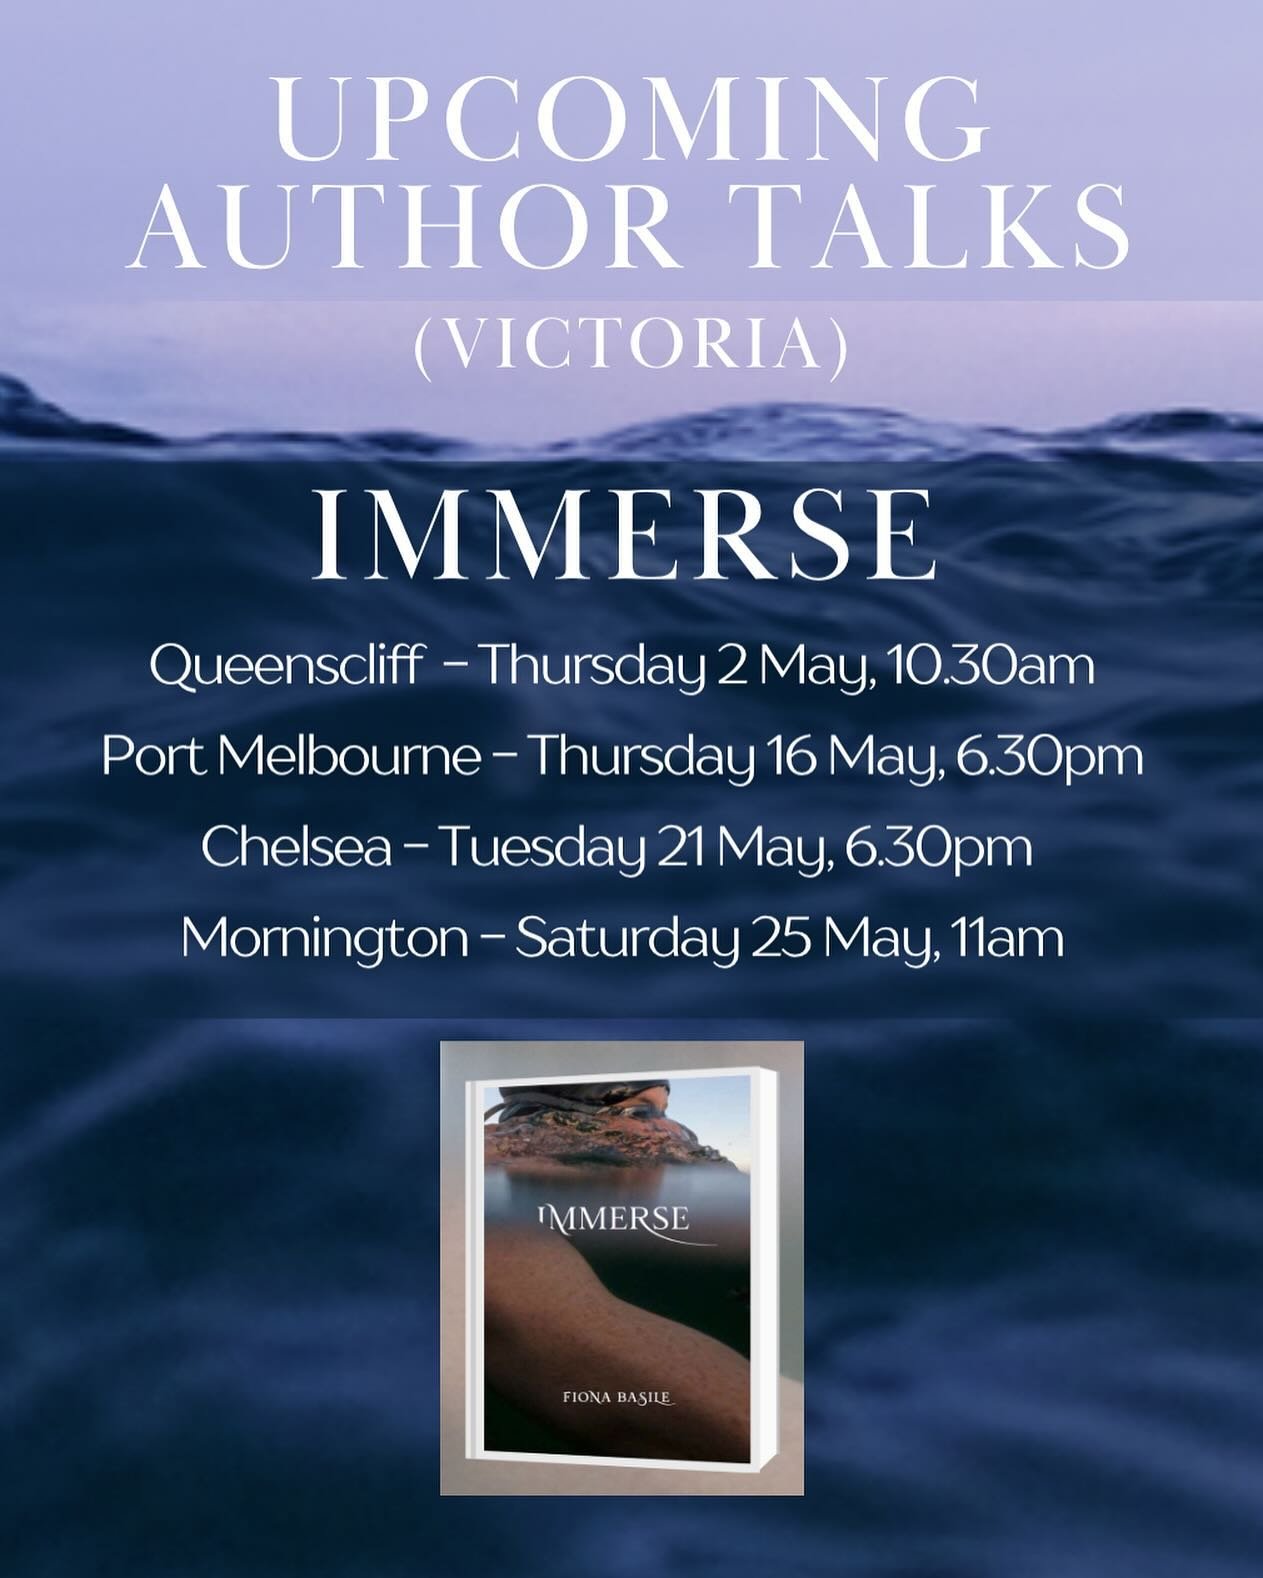 ** Upcoming Author Talks for Immerse **

I&rsquo;d love to see you at one of my upcoming author talks, where I delve into the back story of Immerse, my latest photographic book celebrating the beauty and joy of the bat, and a special open water swimm